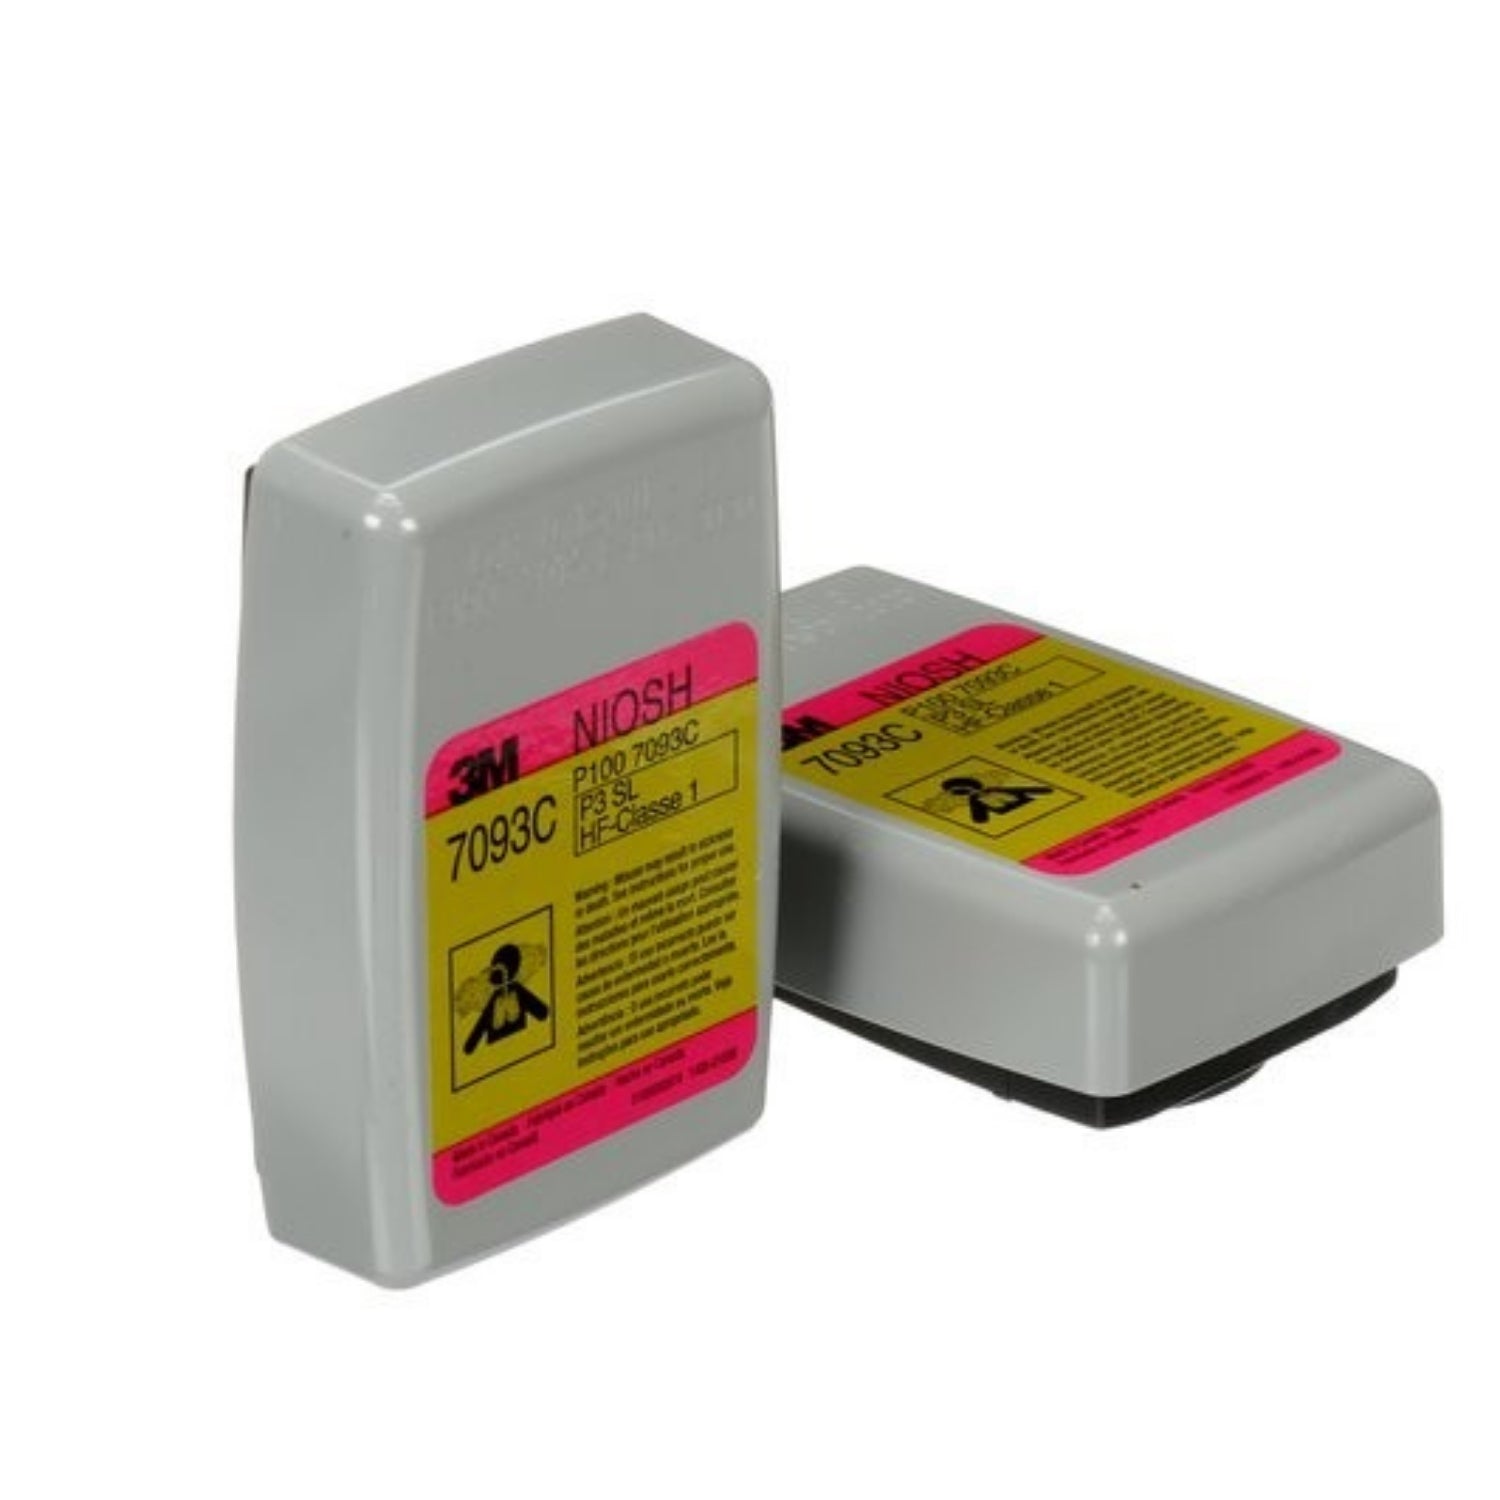 3M™ Hydrogen Fluoride Cartridge/Filter 7093CB, P100, with Nuisance Level Organic Vapor and Acid Gas Relief